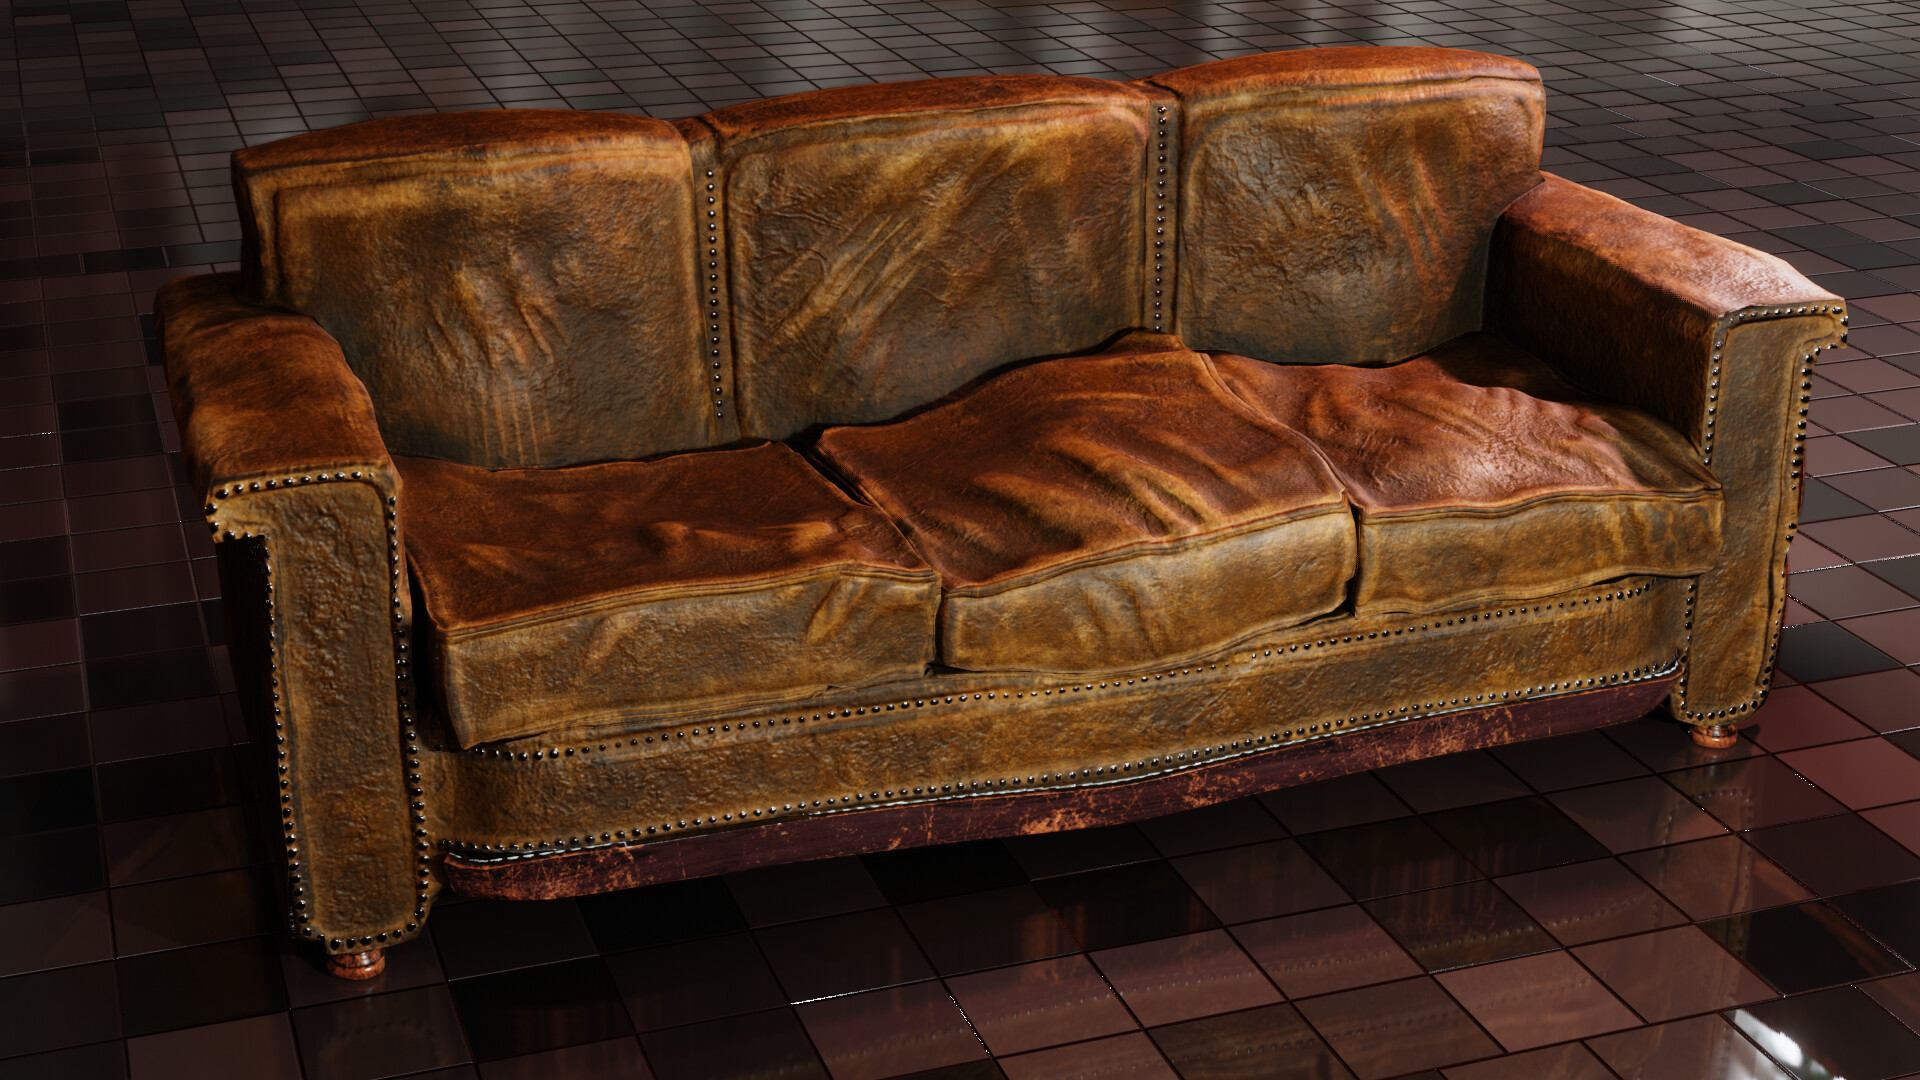 Old Worn Leather Sofa Practice, Worn Leather Couch